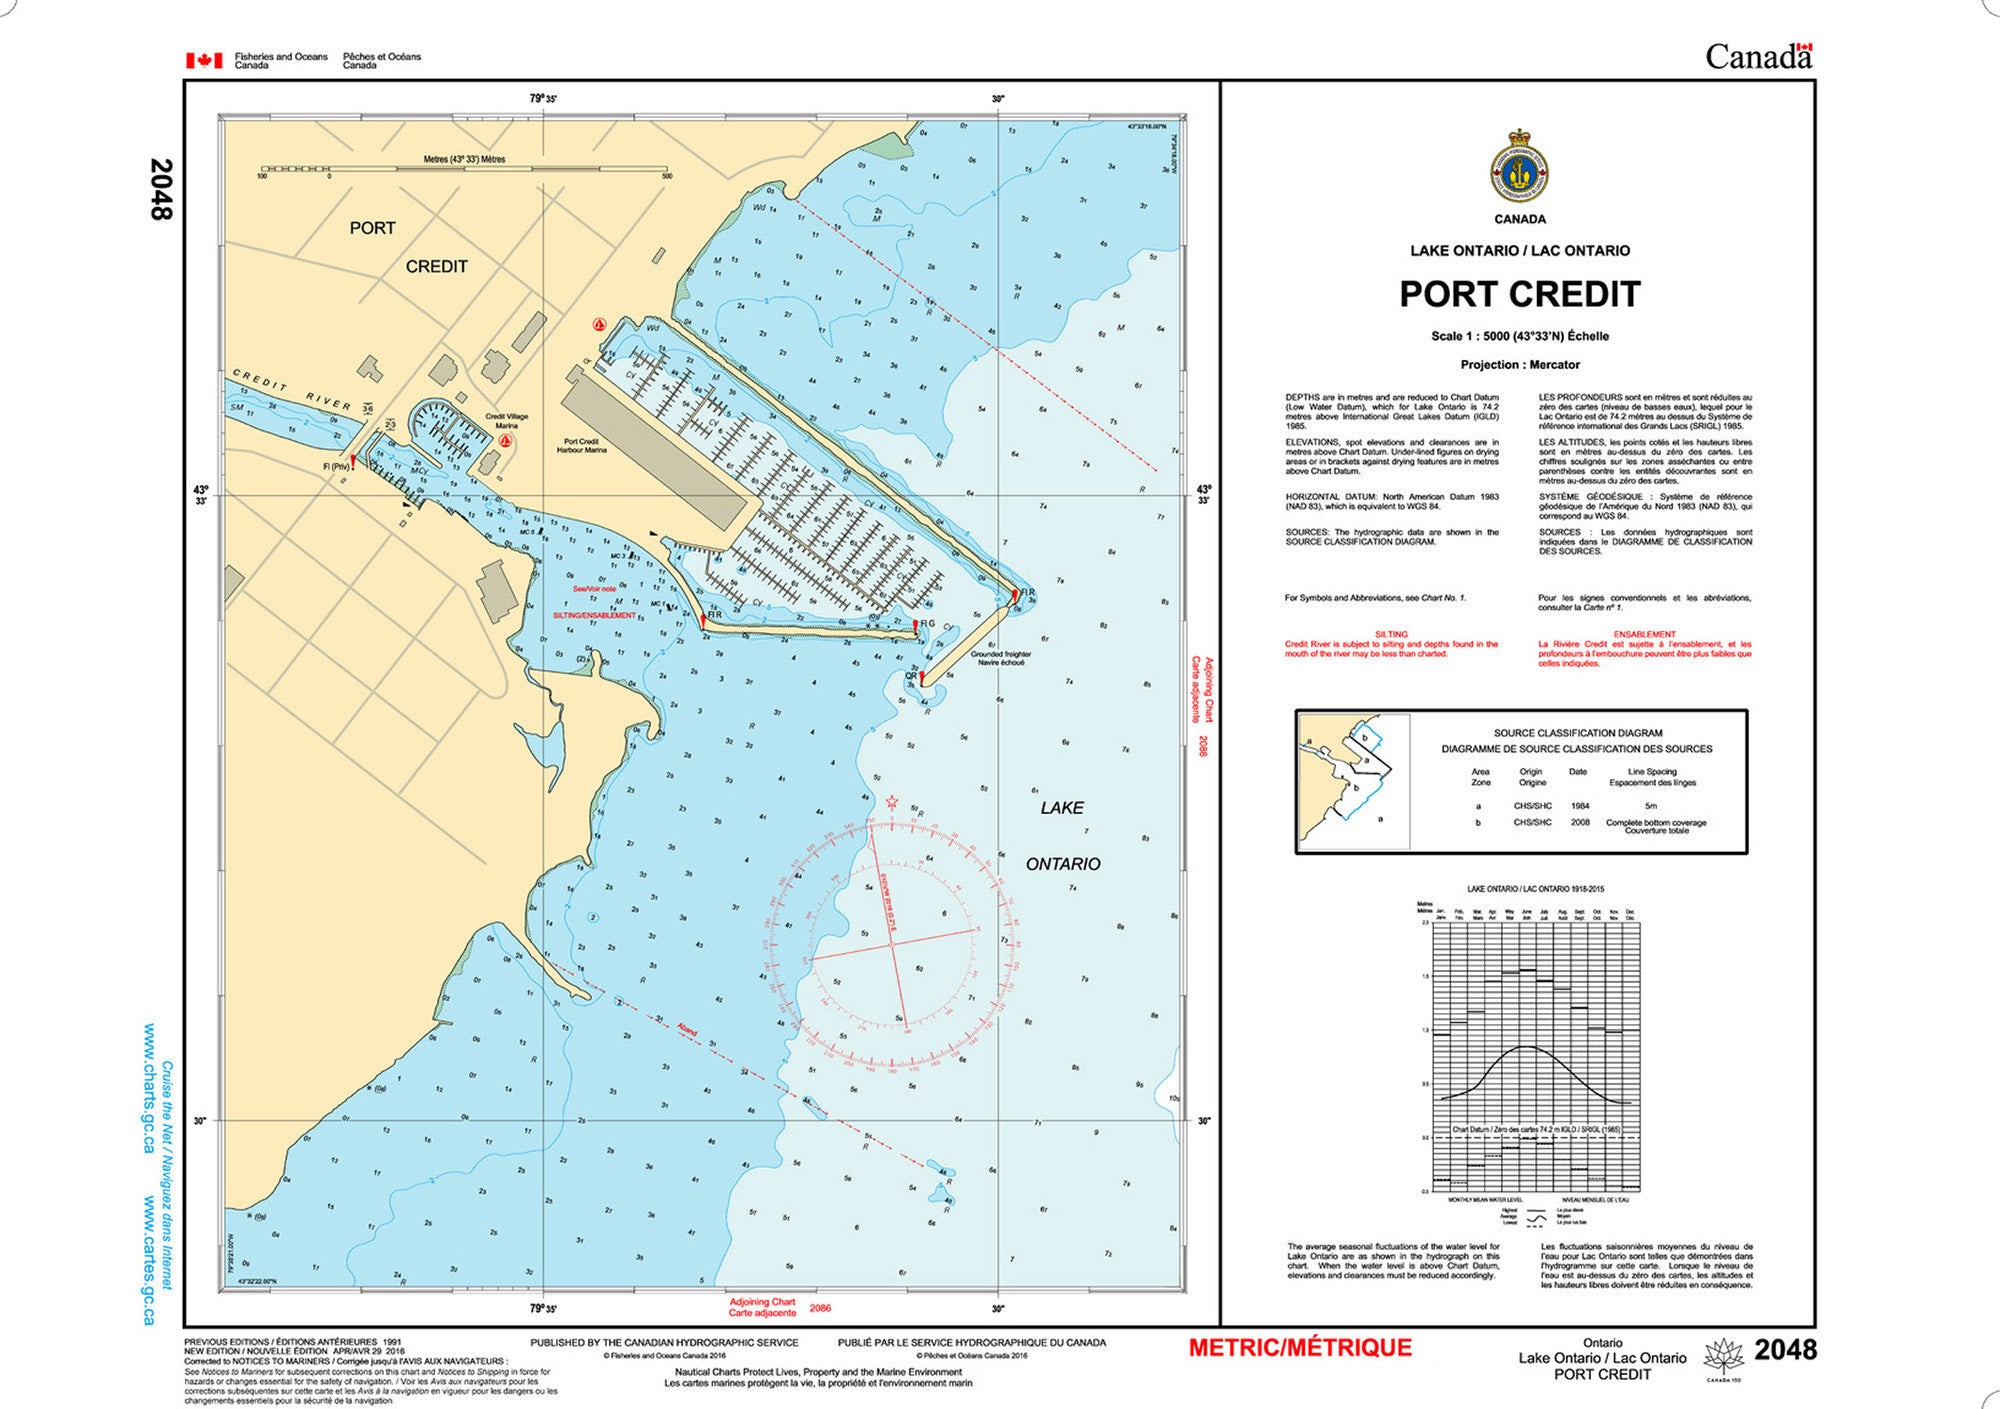 Canadian Hydrographic Service Nautical Chart CHS2048: Port Credit